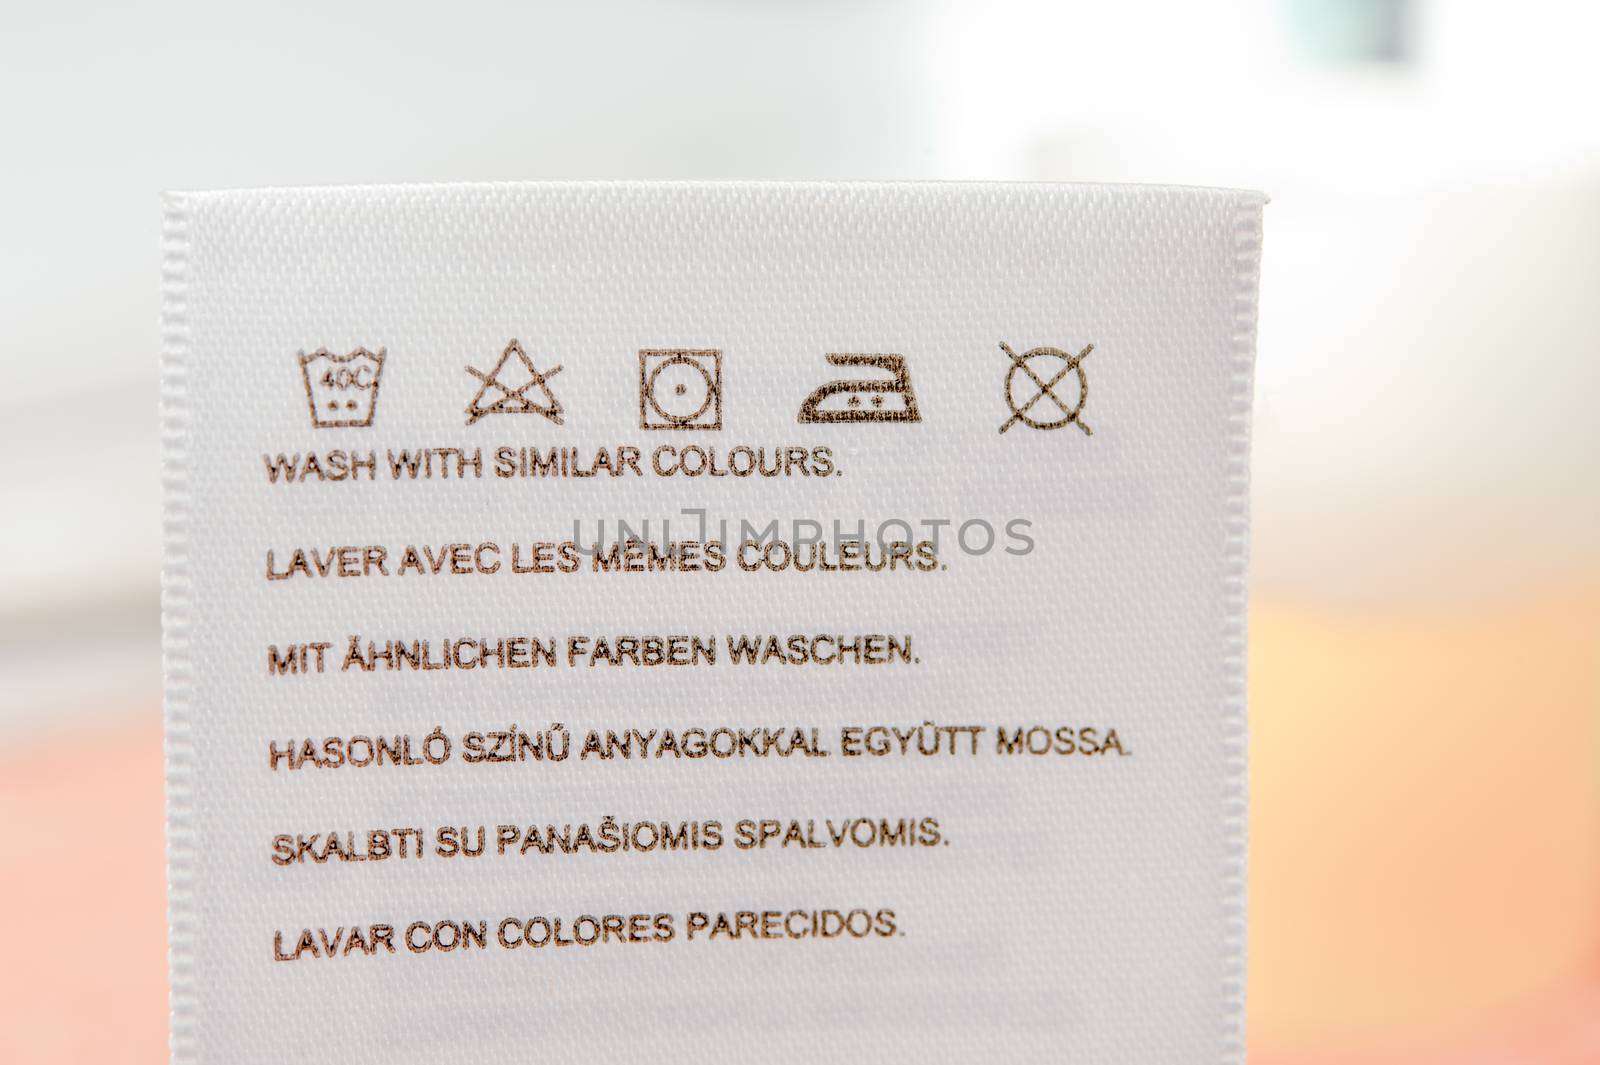 Clothes label with cleaning instructions. Close up.